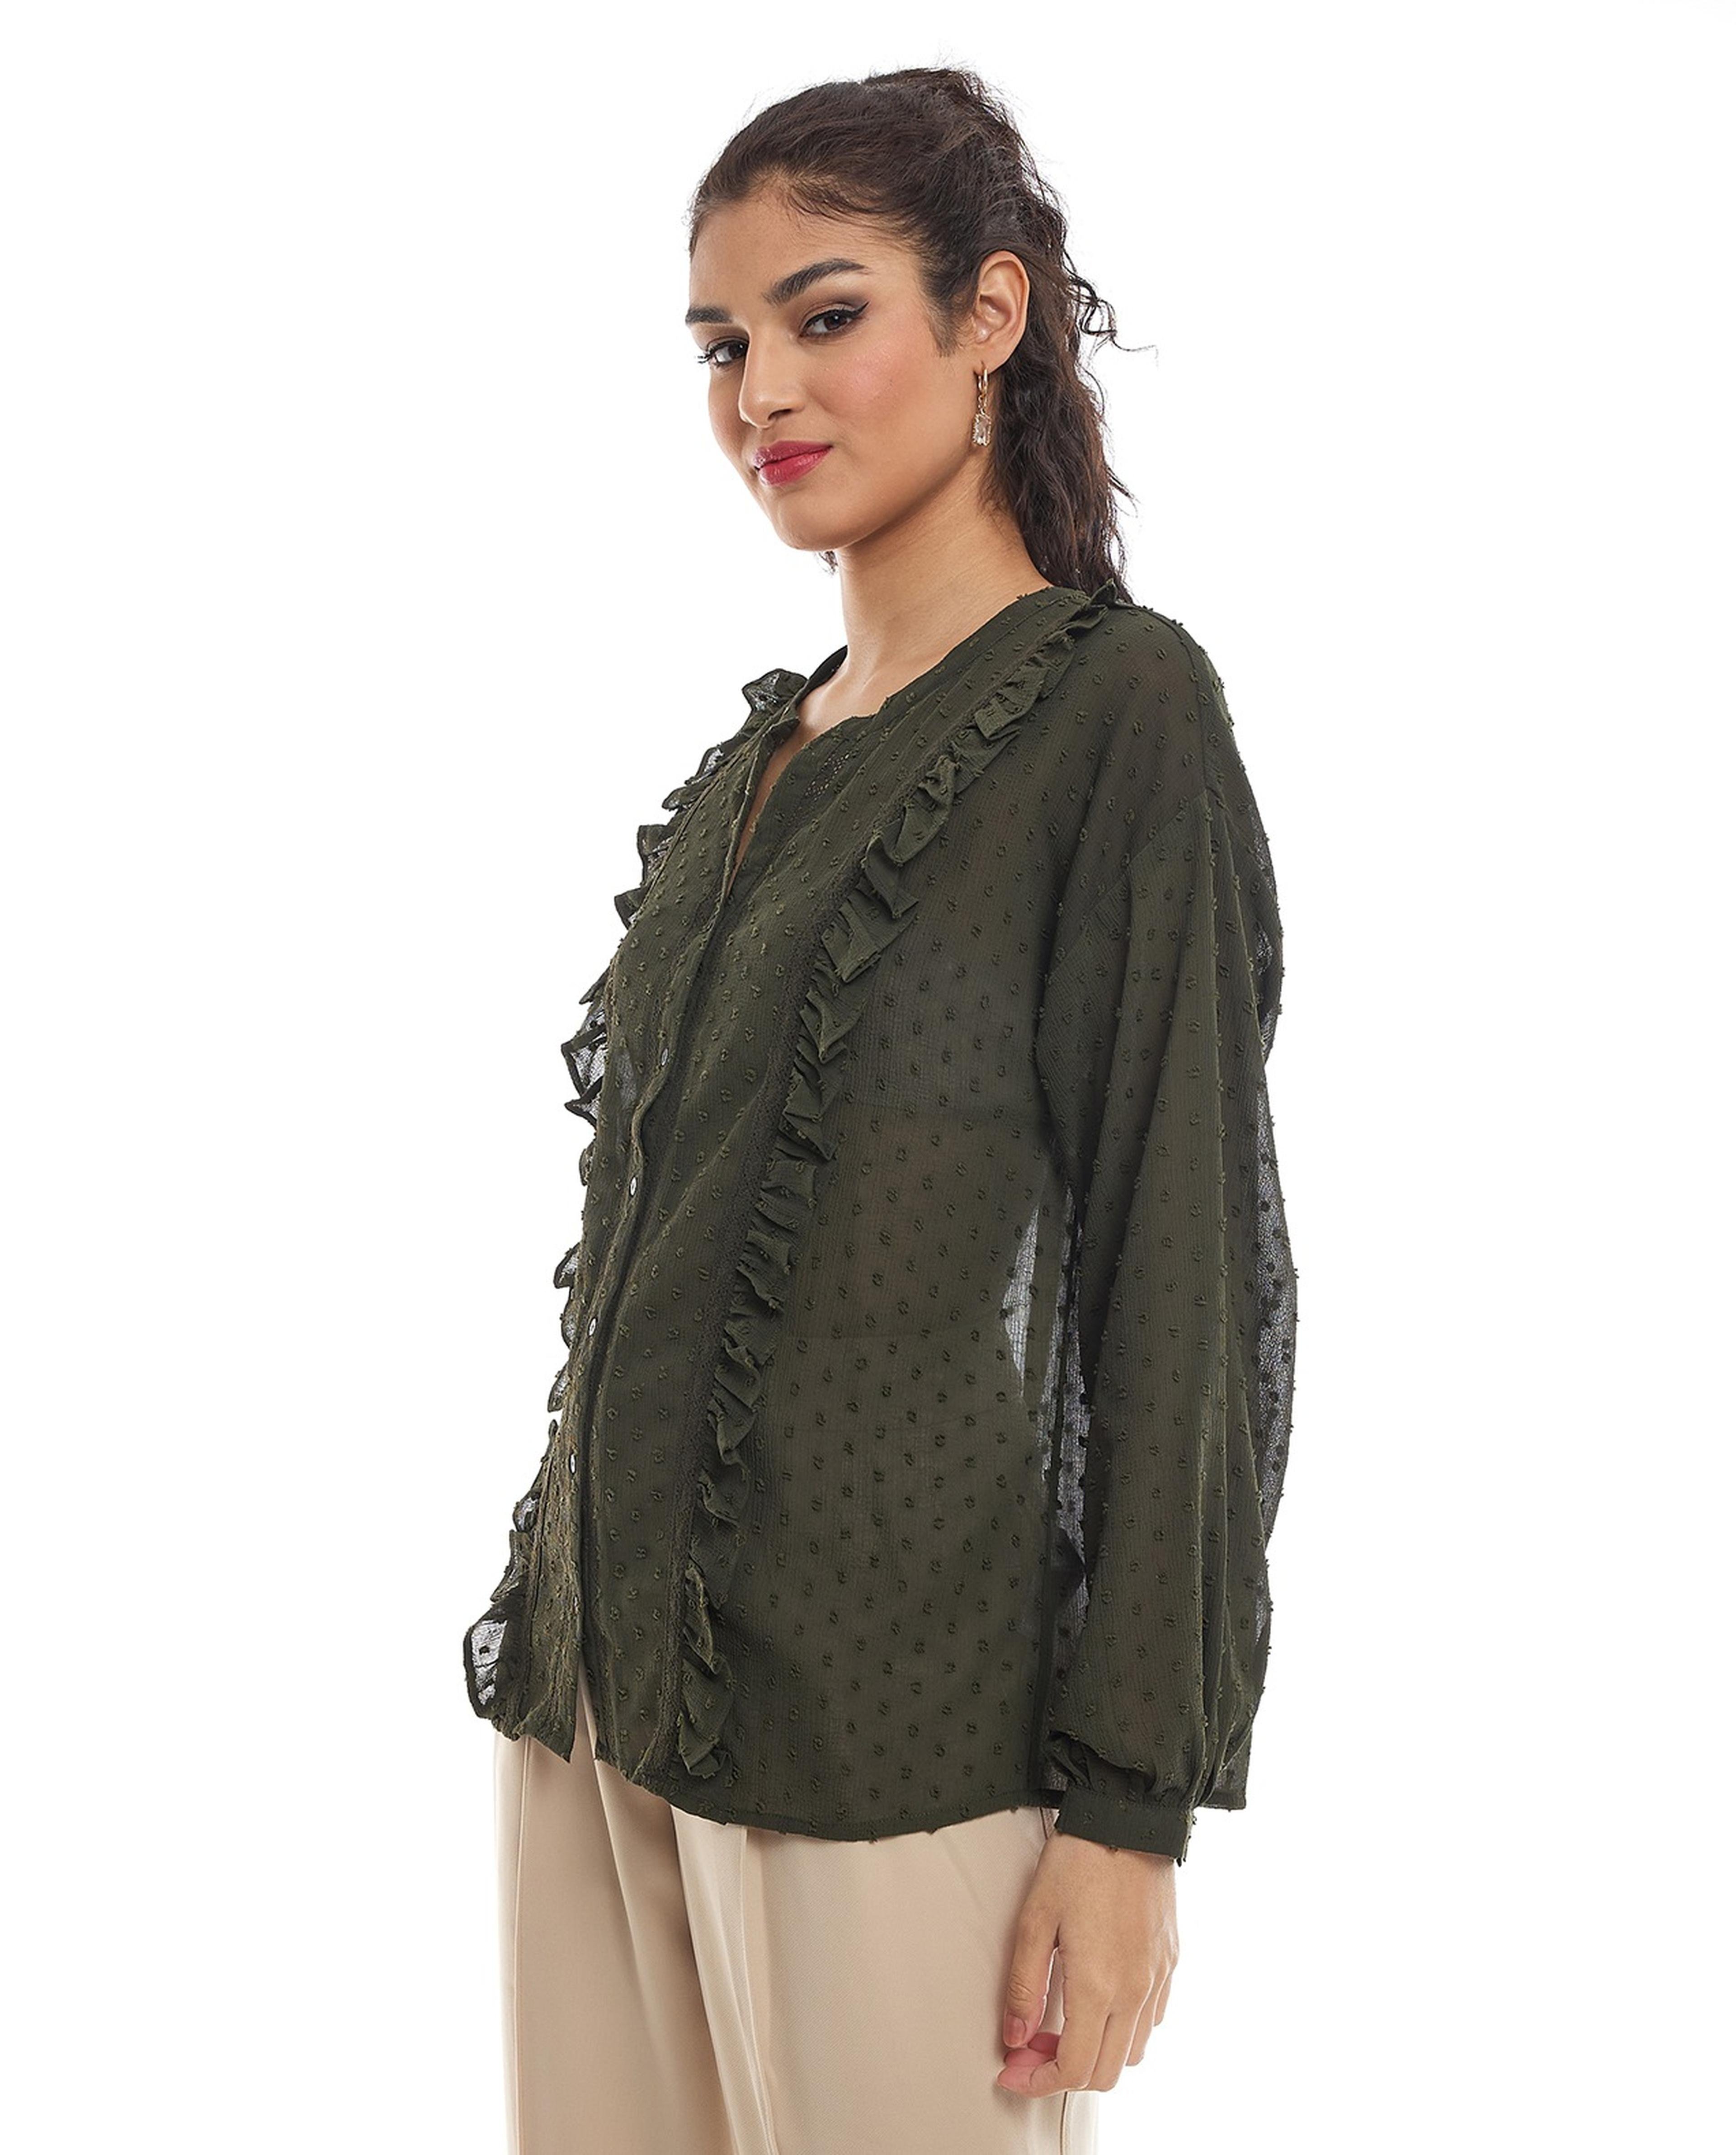 Woven Top with Split Neck and Long Sleeves